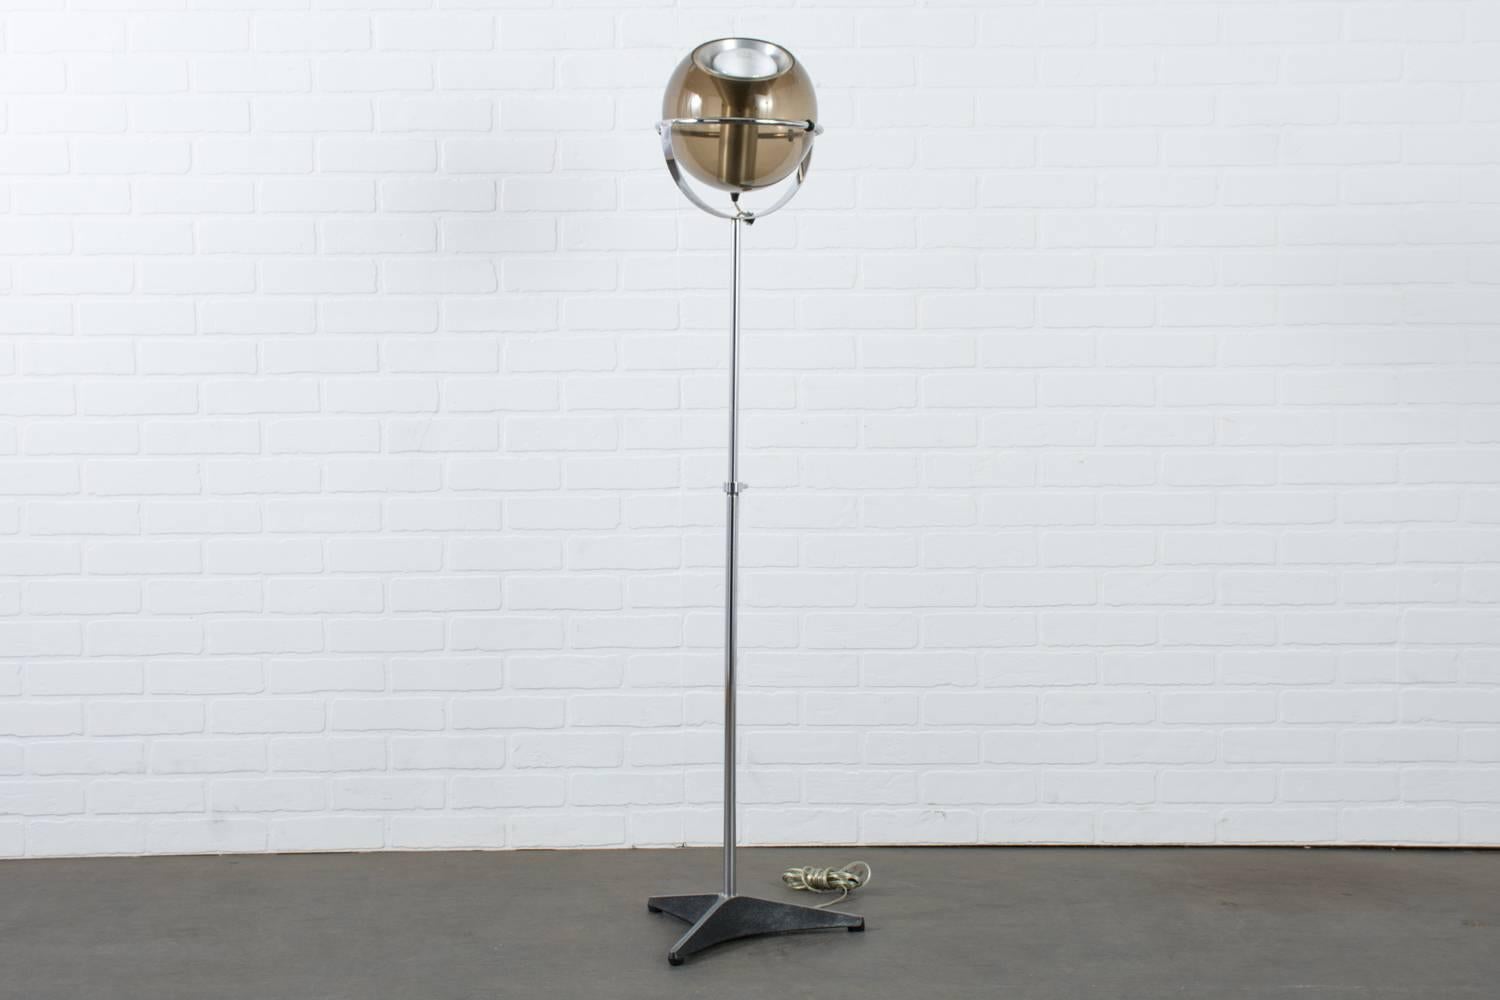 The 'Globe 2000' floor lamp was designed by Frank Ligtelijn for RAAK, Amsterdam in 1961 and has become one of RAAK's most celebrated designs and an icon in Dutch lighting design. It features an adjustable metal Stand with a chrome finish that holds